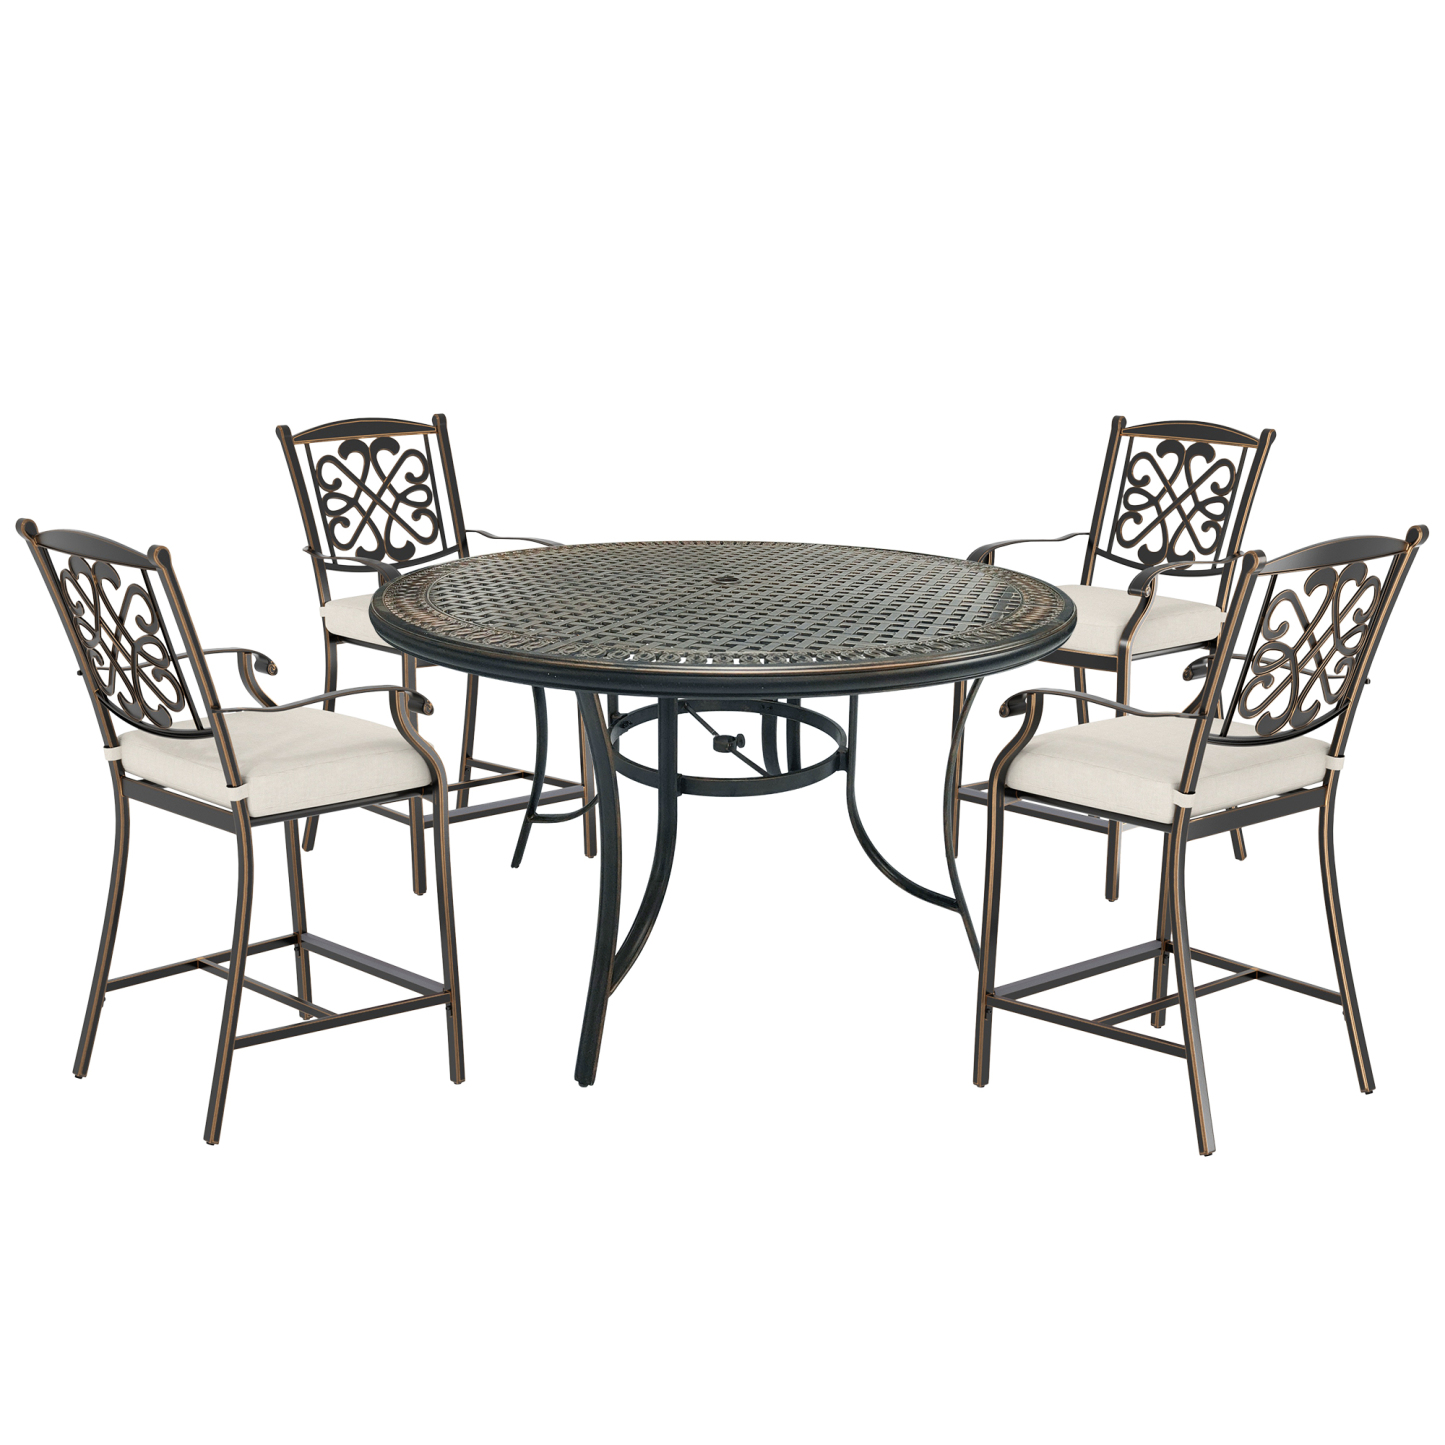 Mondawe 5Pcs Cast Aluminum Dining Bar Set with Round Table and Diamond-Mesh Curved Backrest Dining Chairs in Red/Beige-Mondawe